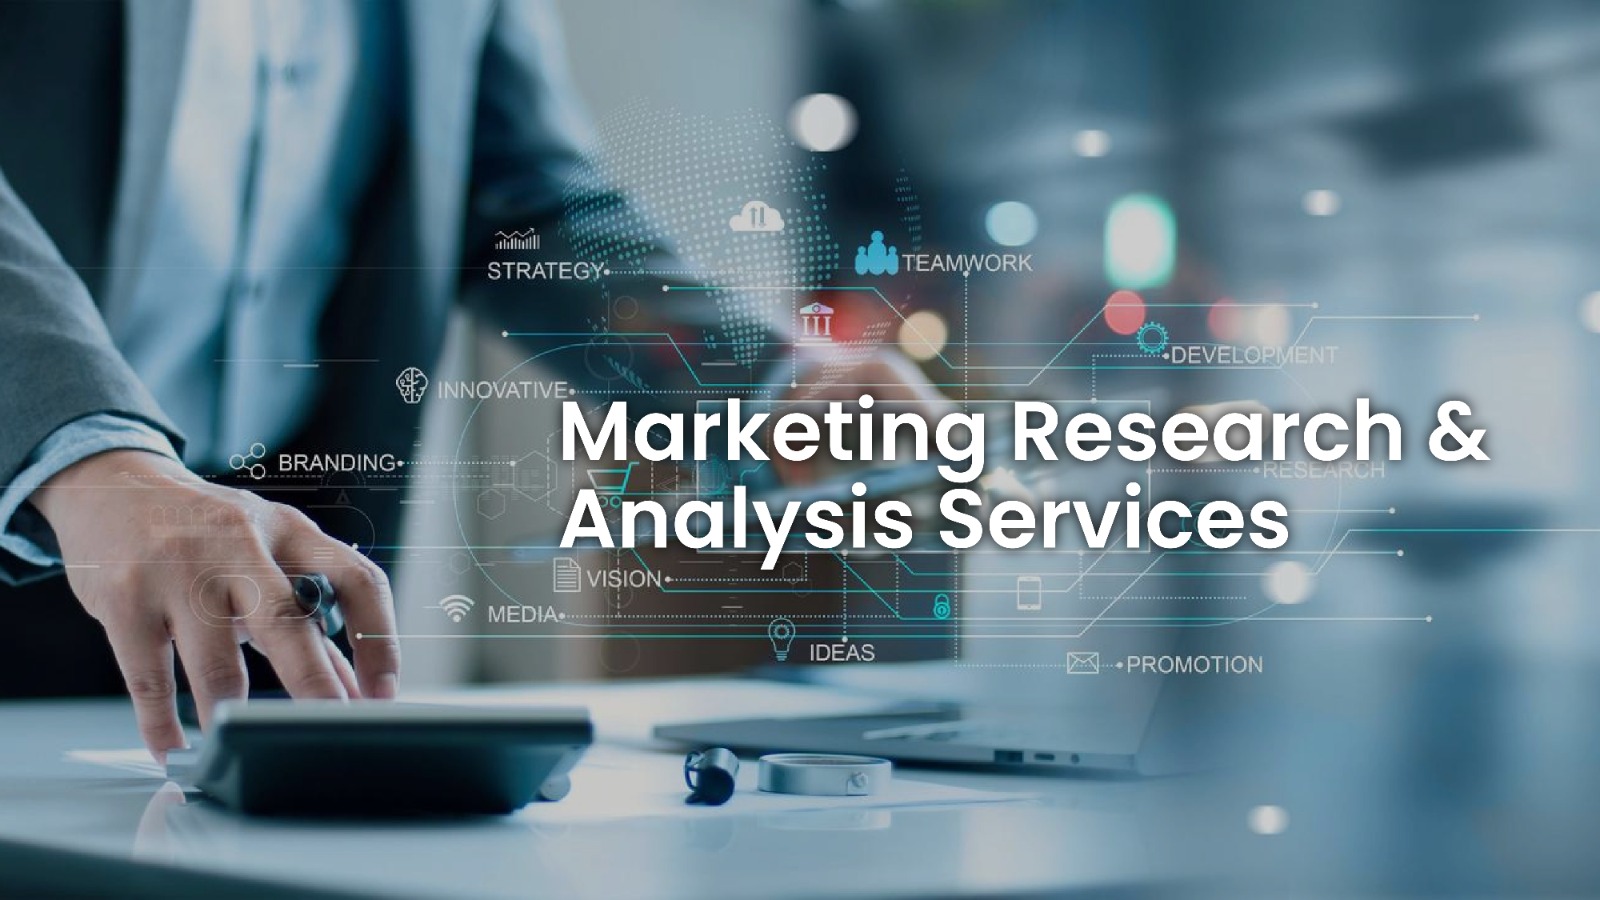 market research and analysis services